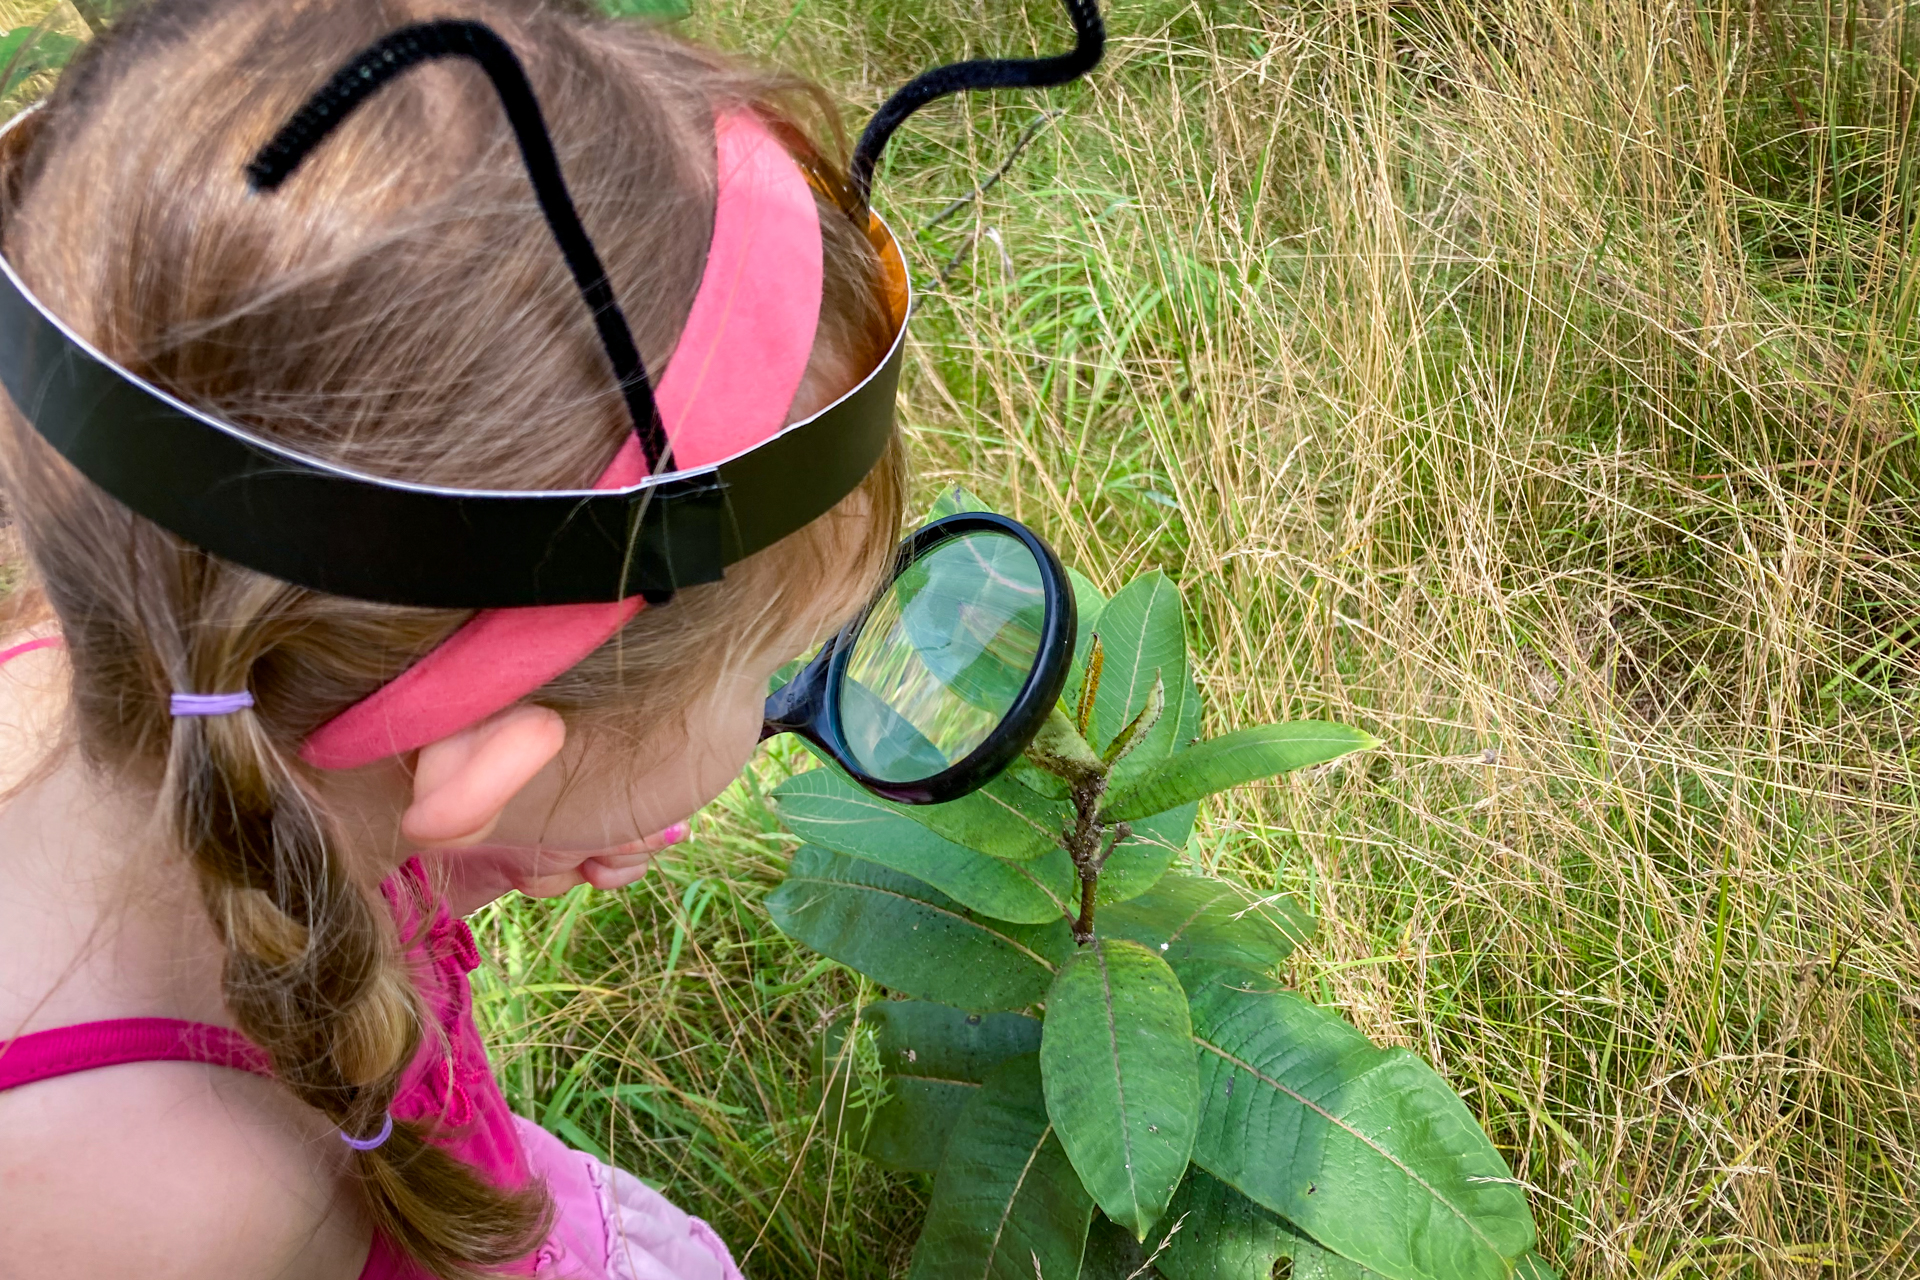 A camper at Habitat Nature Camp, wearing a headband made of paper and pipe cleaners to mimic insect antennae, using a magnifying glass to examine a milkweed plant